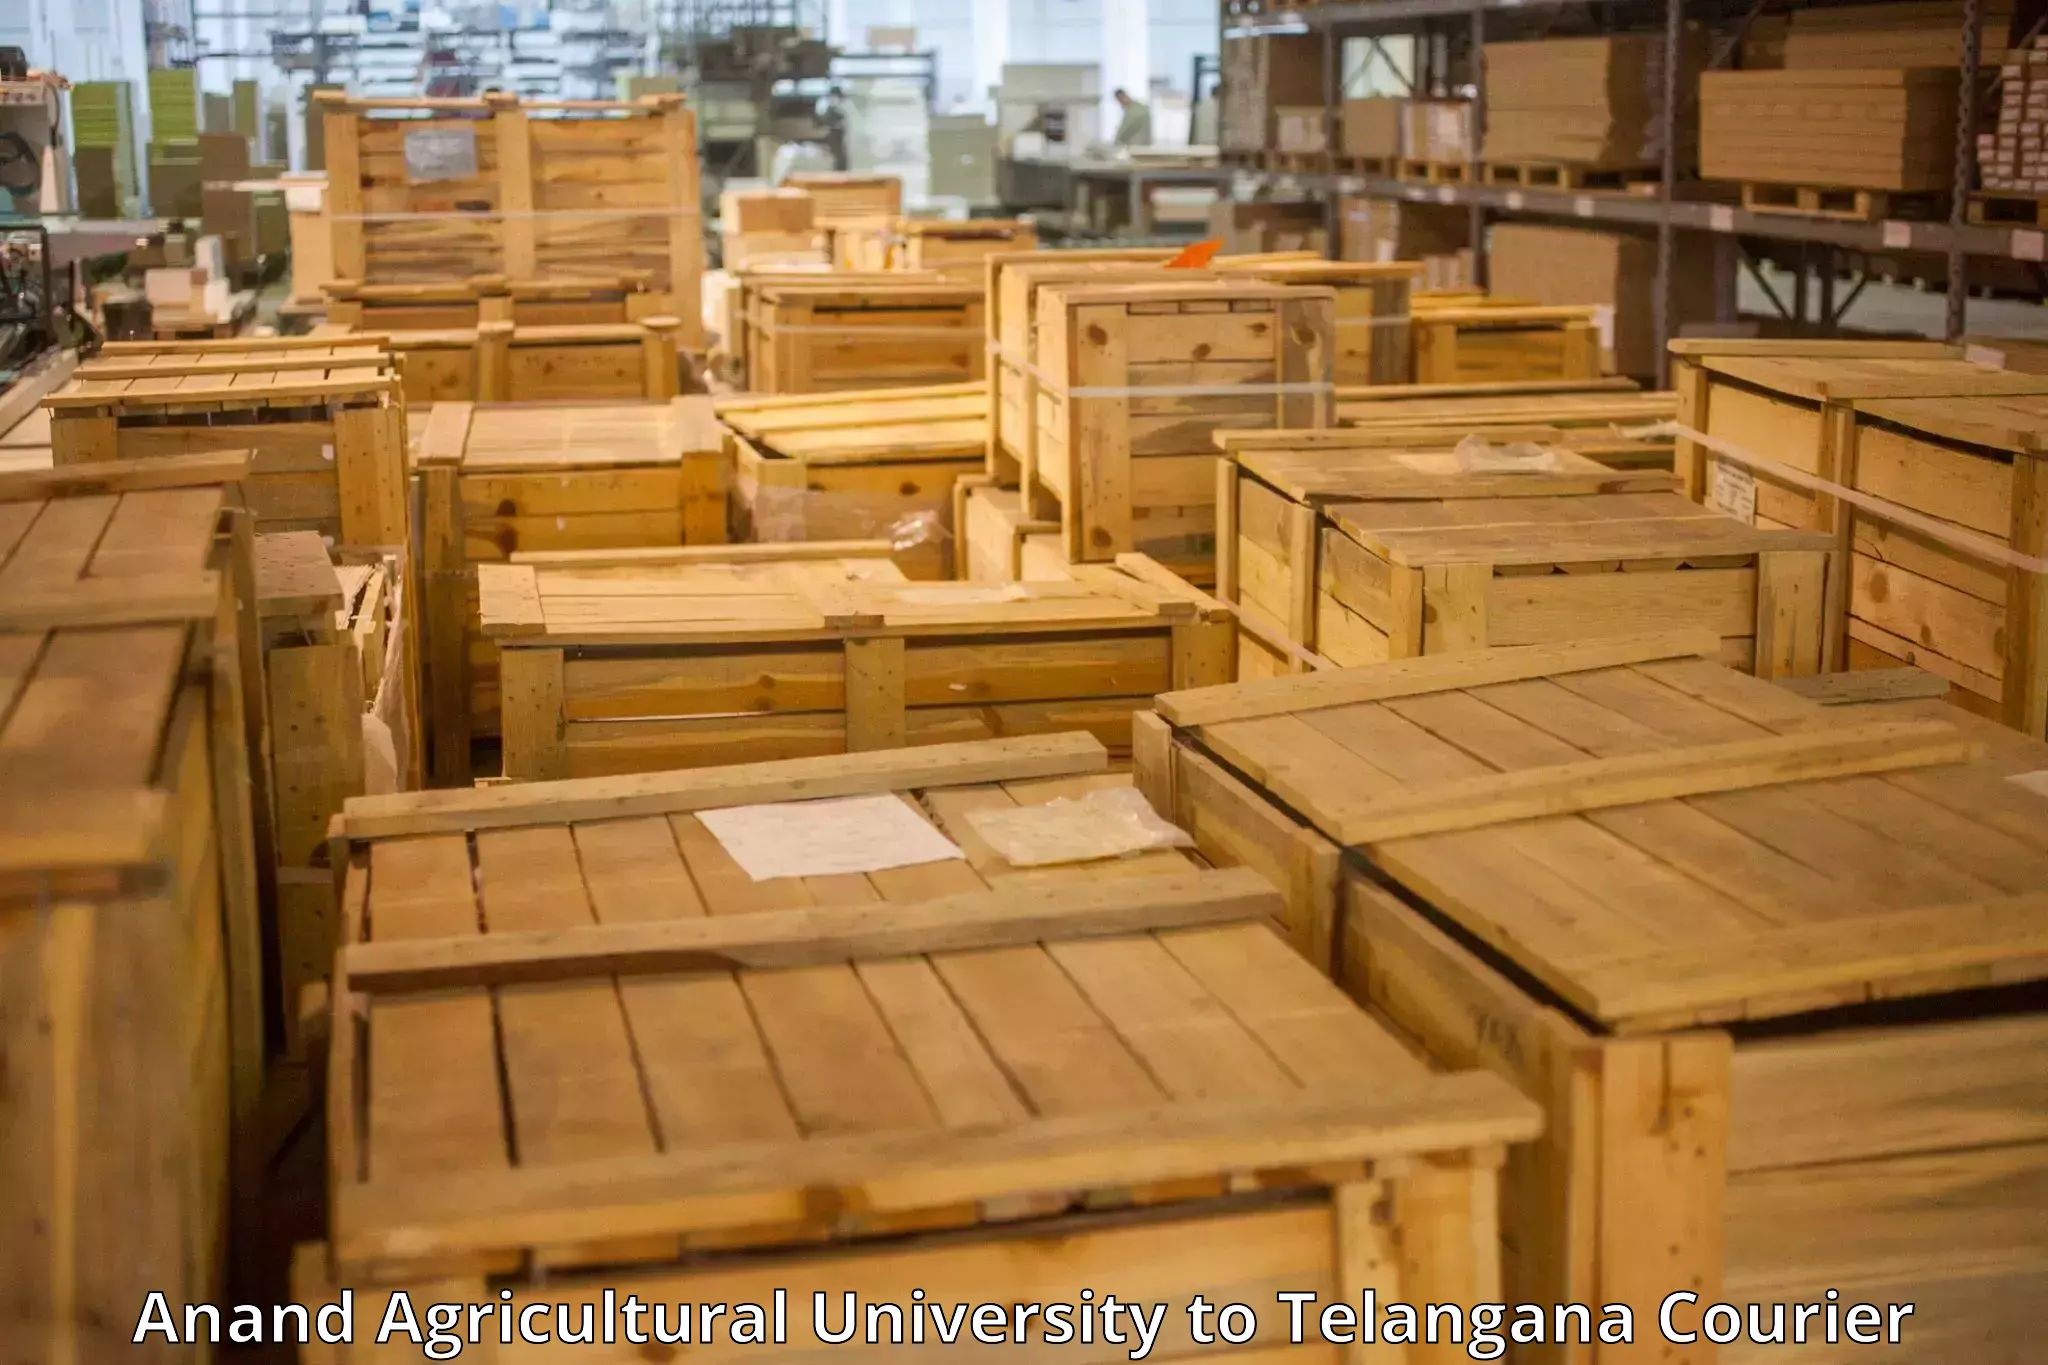 Luggage shipping estimate Anand Agricultural University to Sathupally